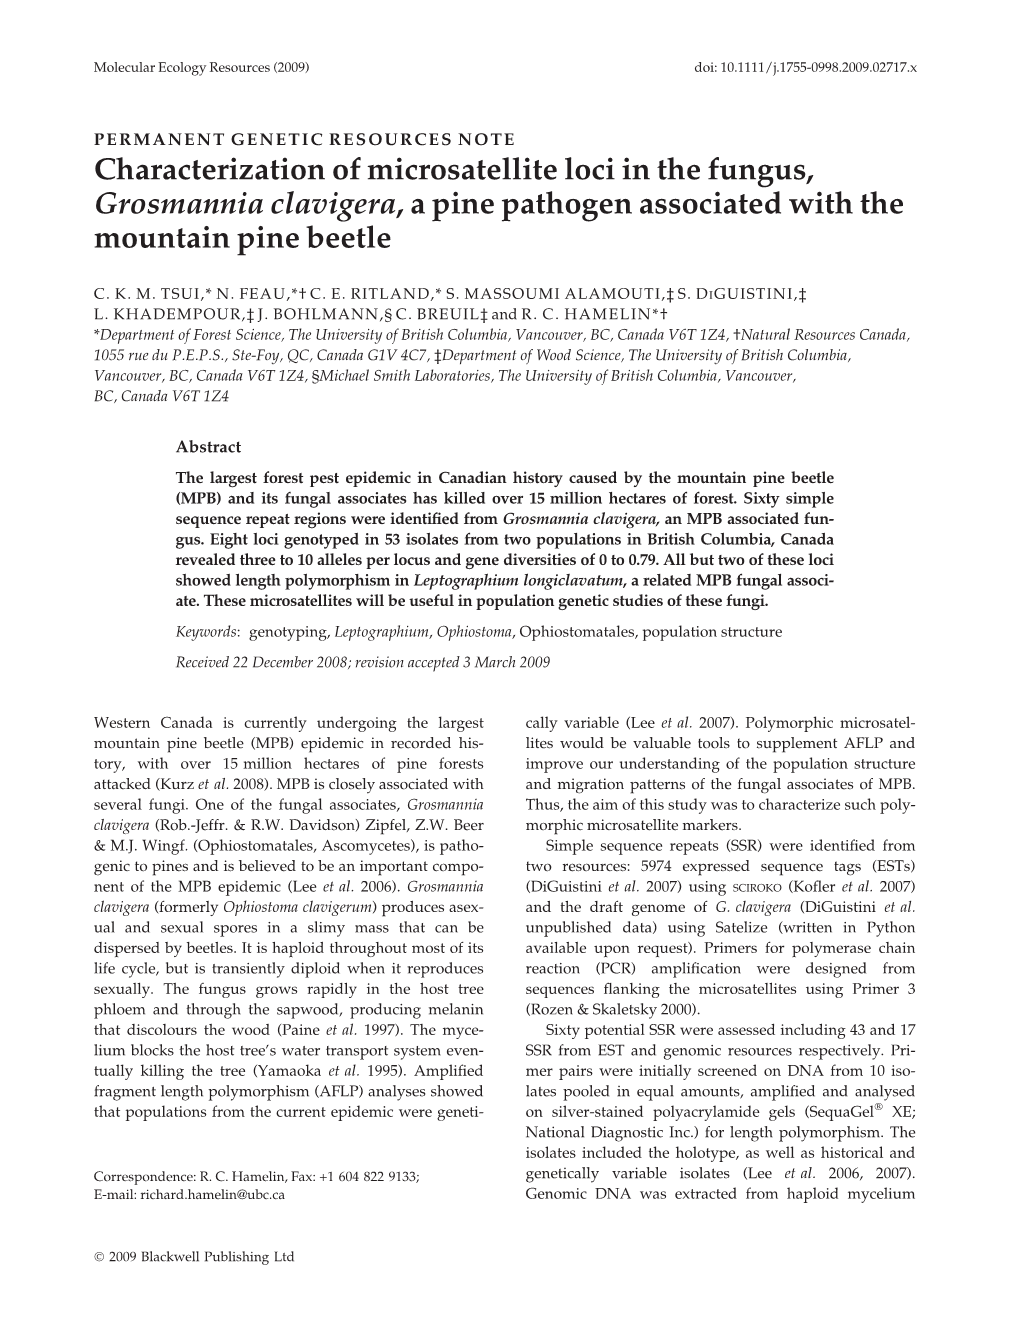 Characterization of Microsatellite Loci in the Fungus, Grosmannia Clavigera, a Pine Pathogen Associated with the Mountain Pine Beetle